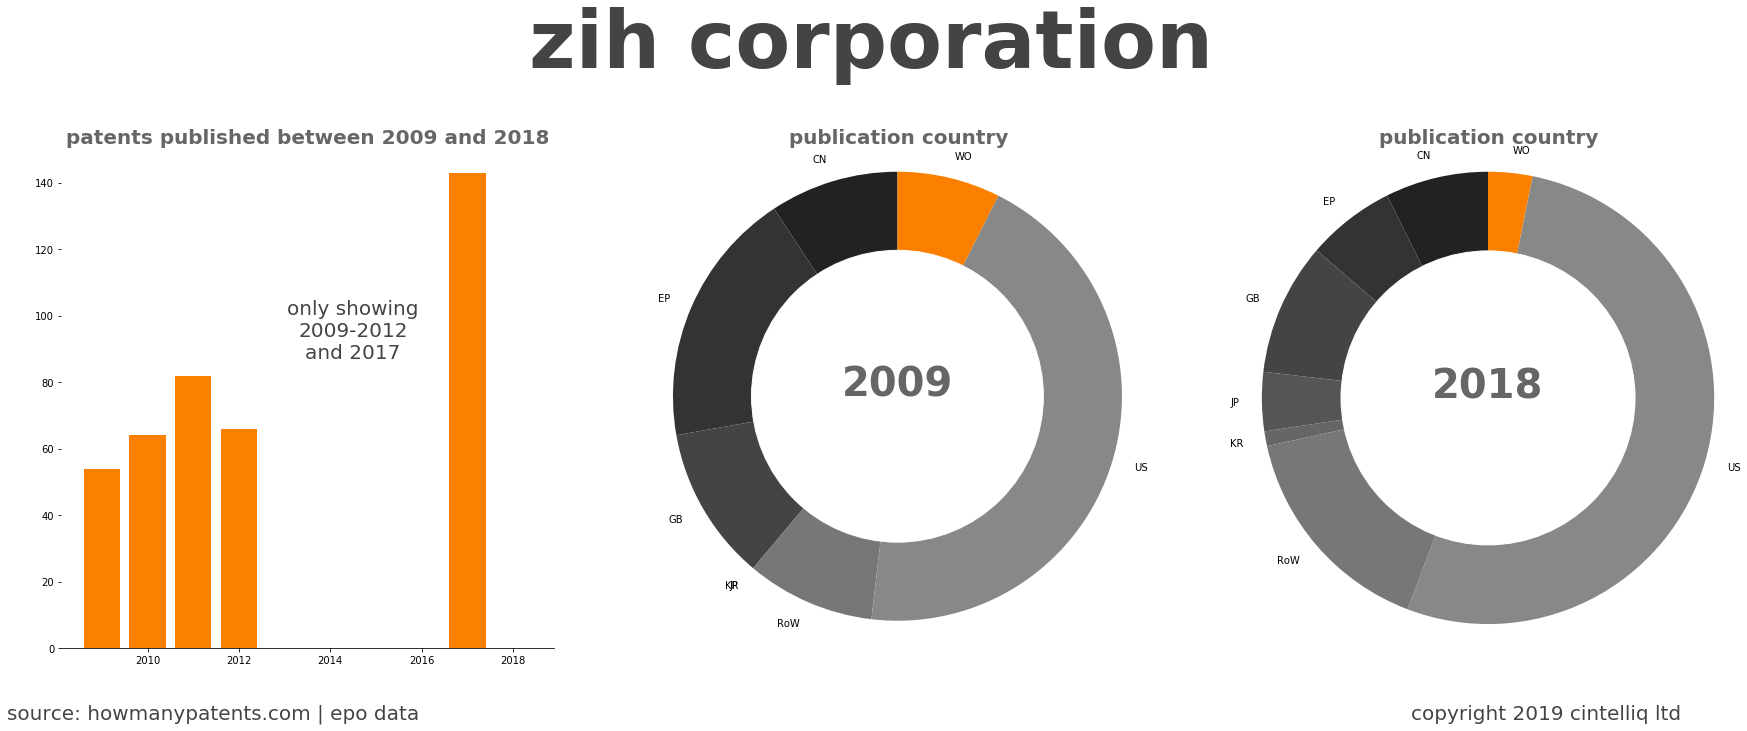 summary of patents for Zih Corporation